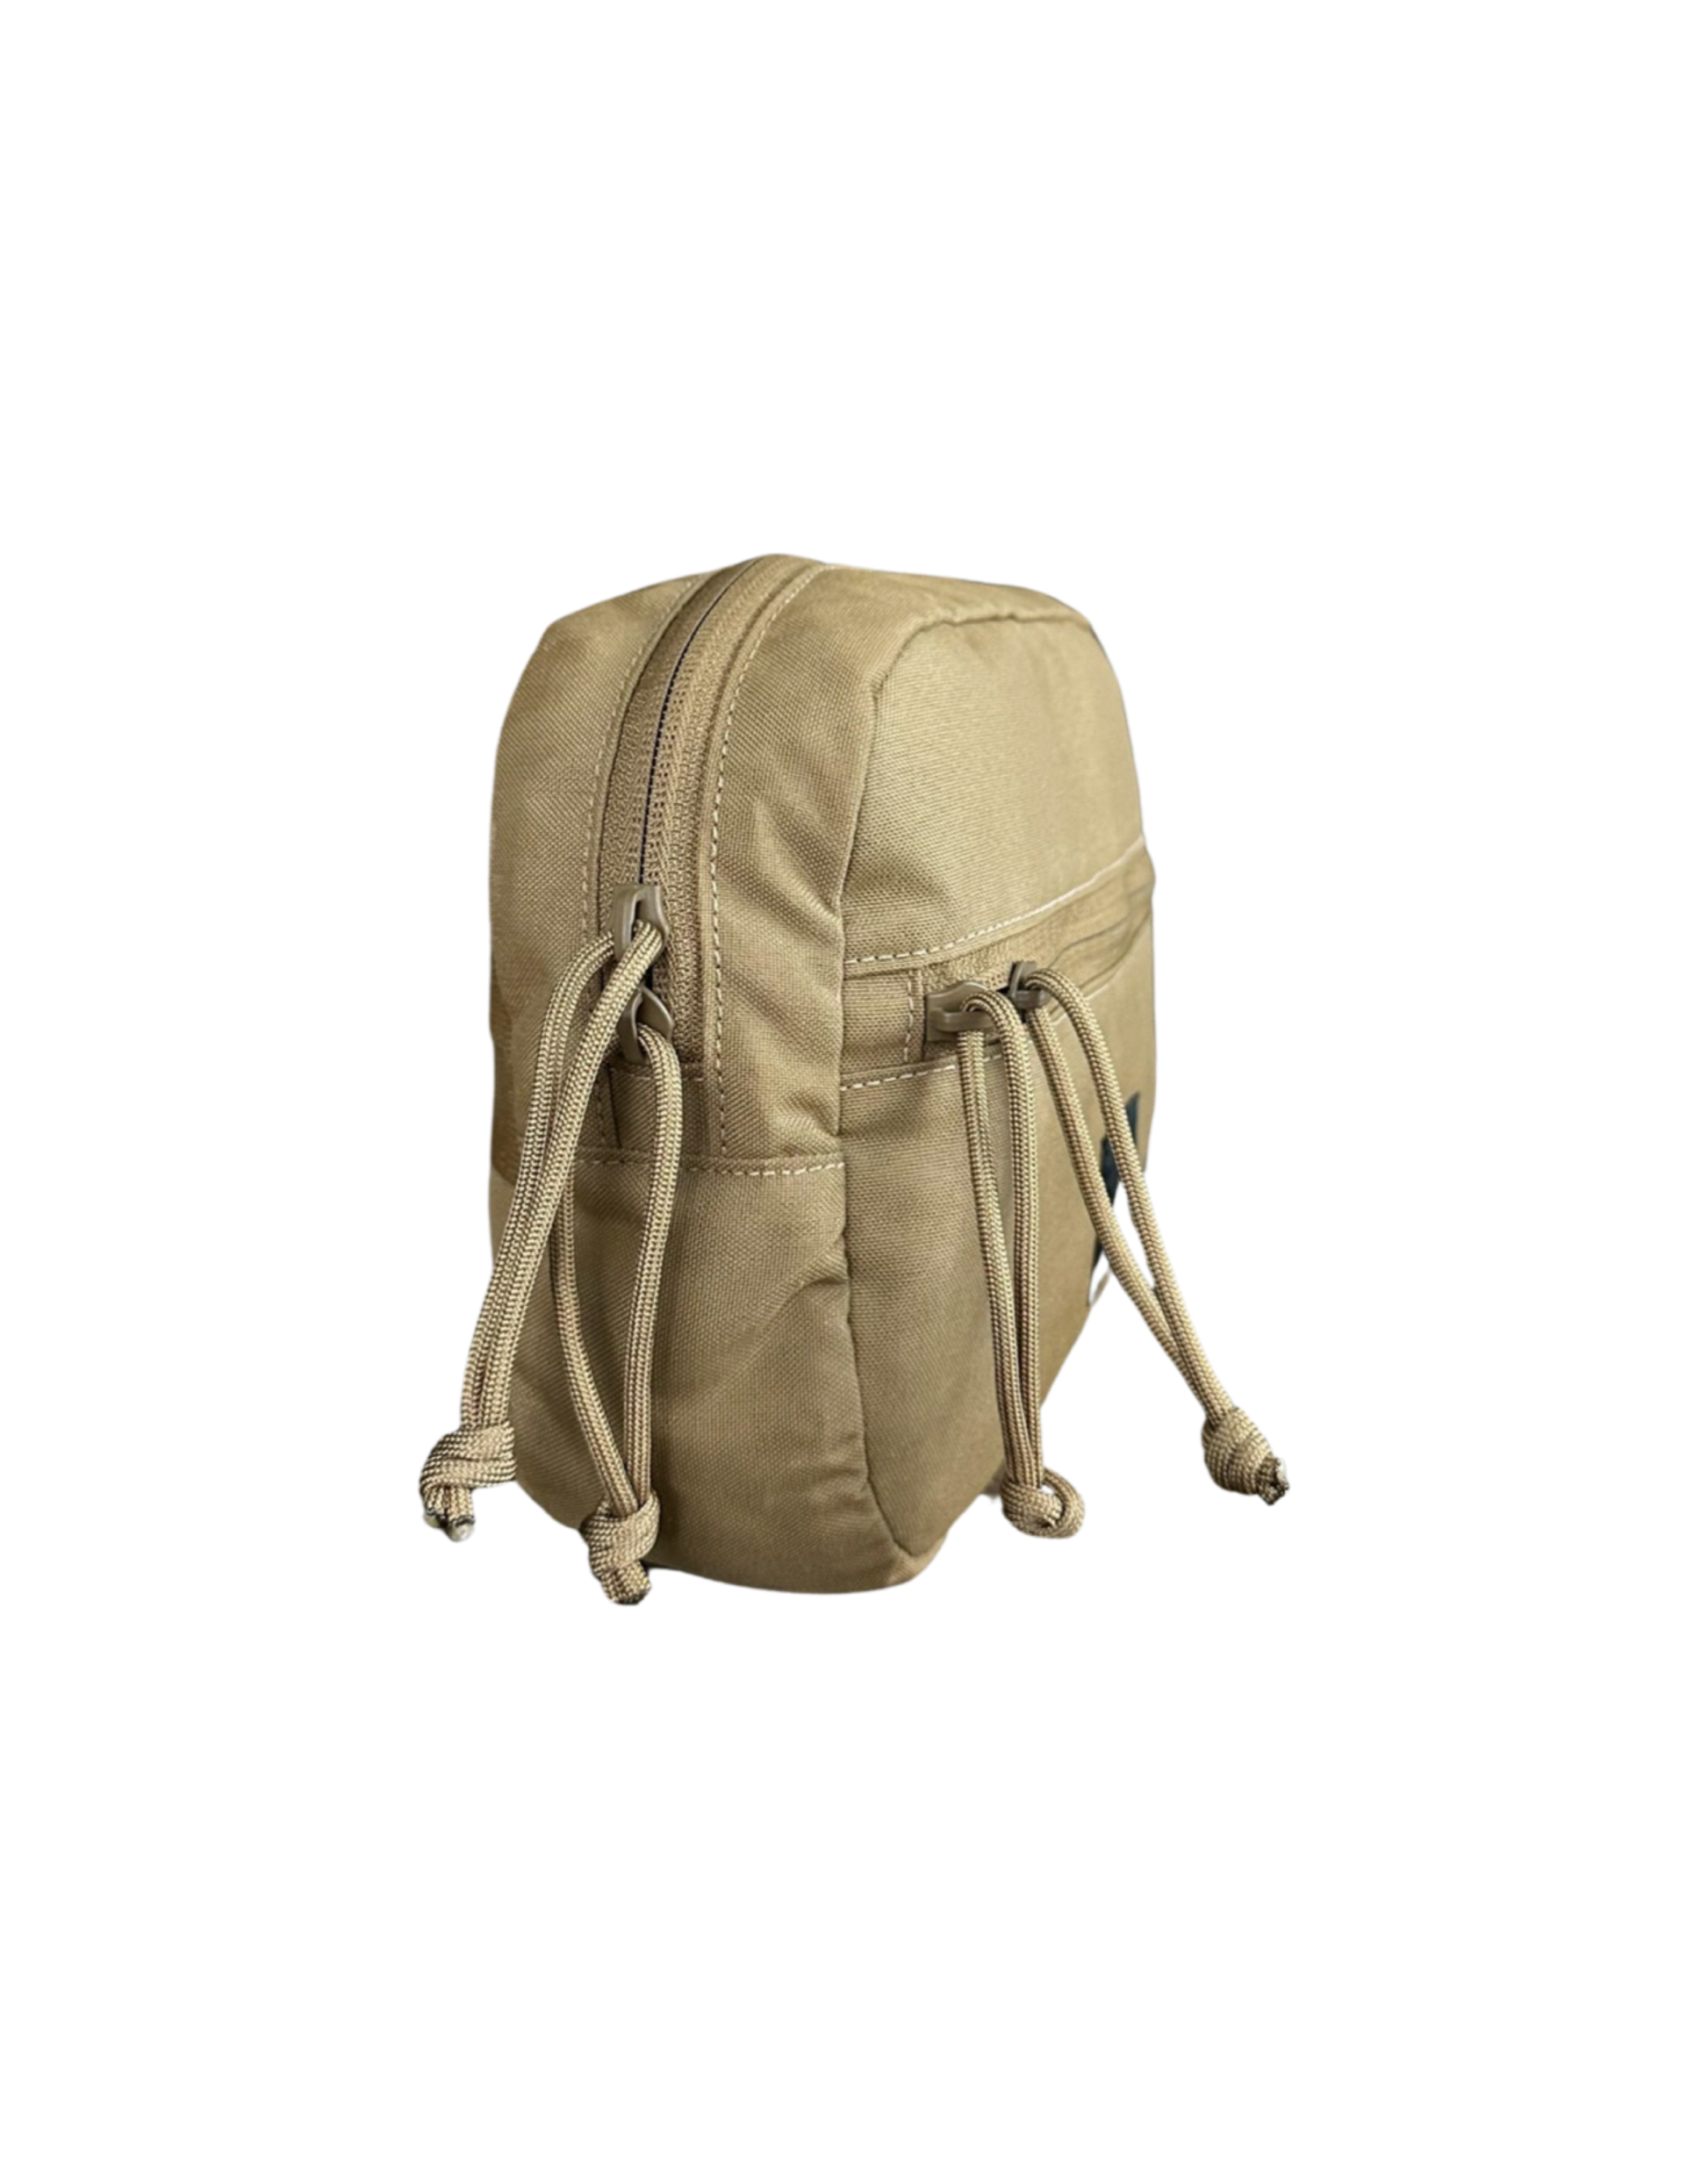 Ruckmule xl Pacer pouch front panel view MOLLE general purpose pouch modular pouch Coyote brown 